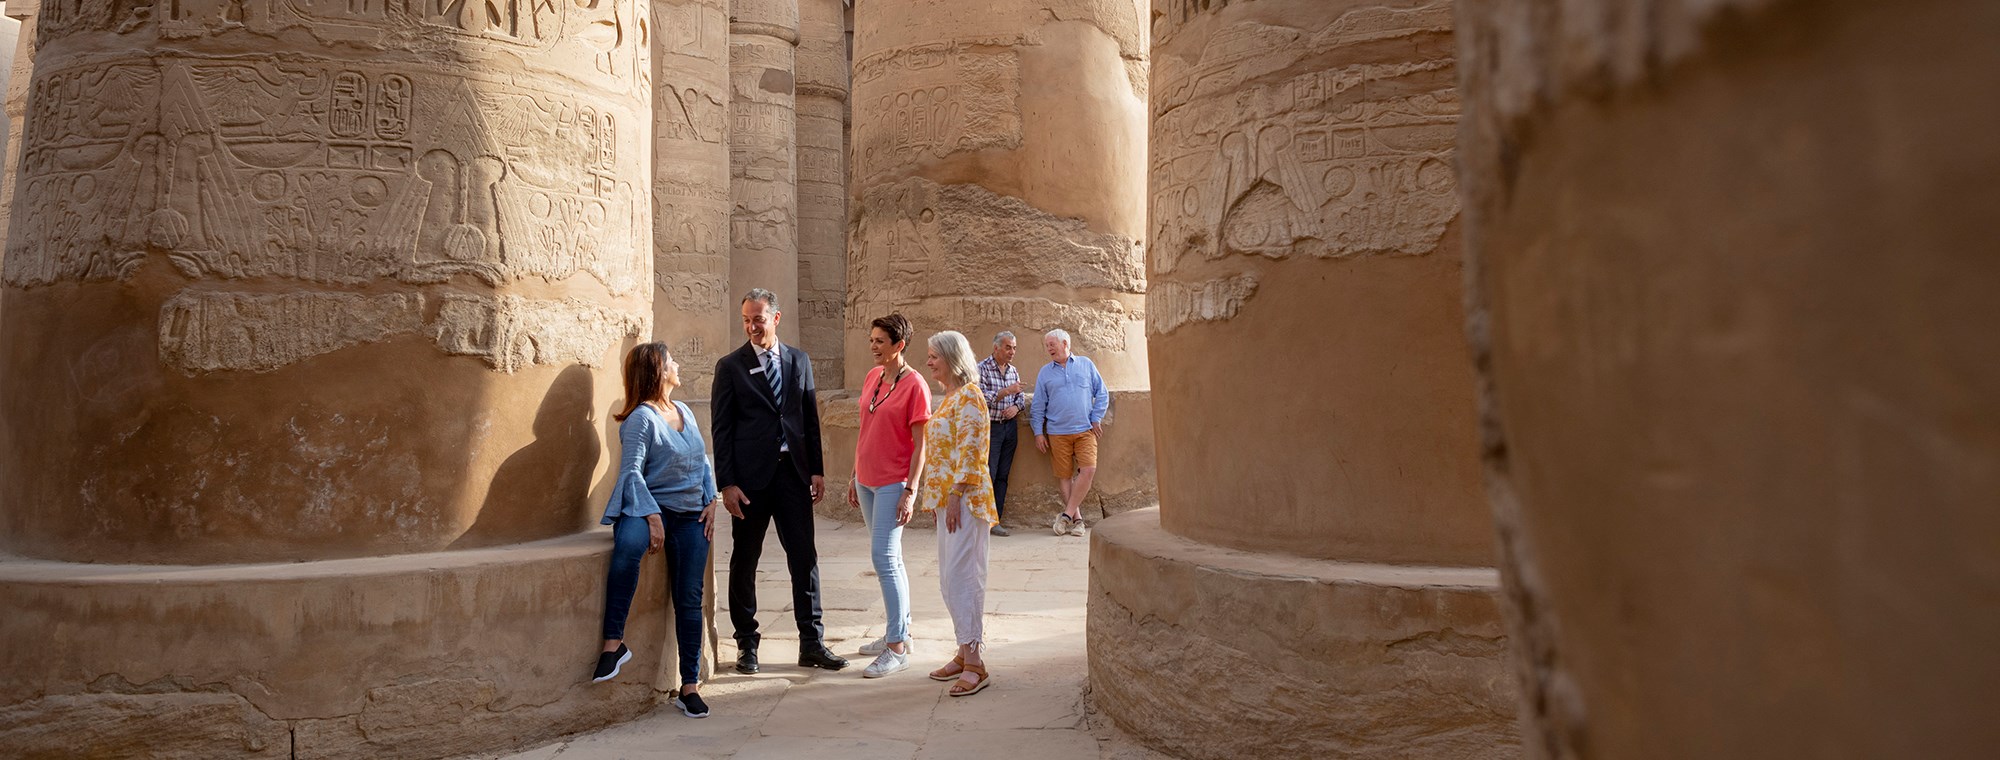 Egypt Karnak Temple Luxor Guests Travel Director Guided Vacation Egyptologist Pyramids